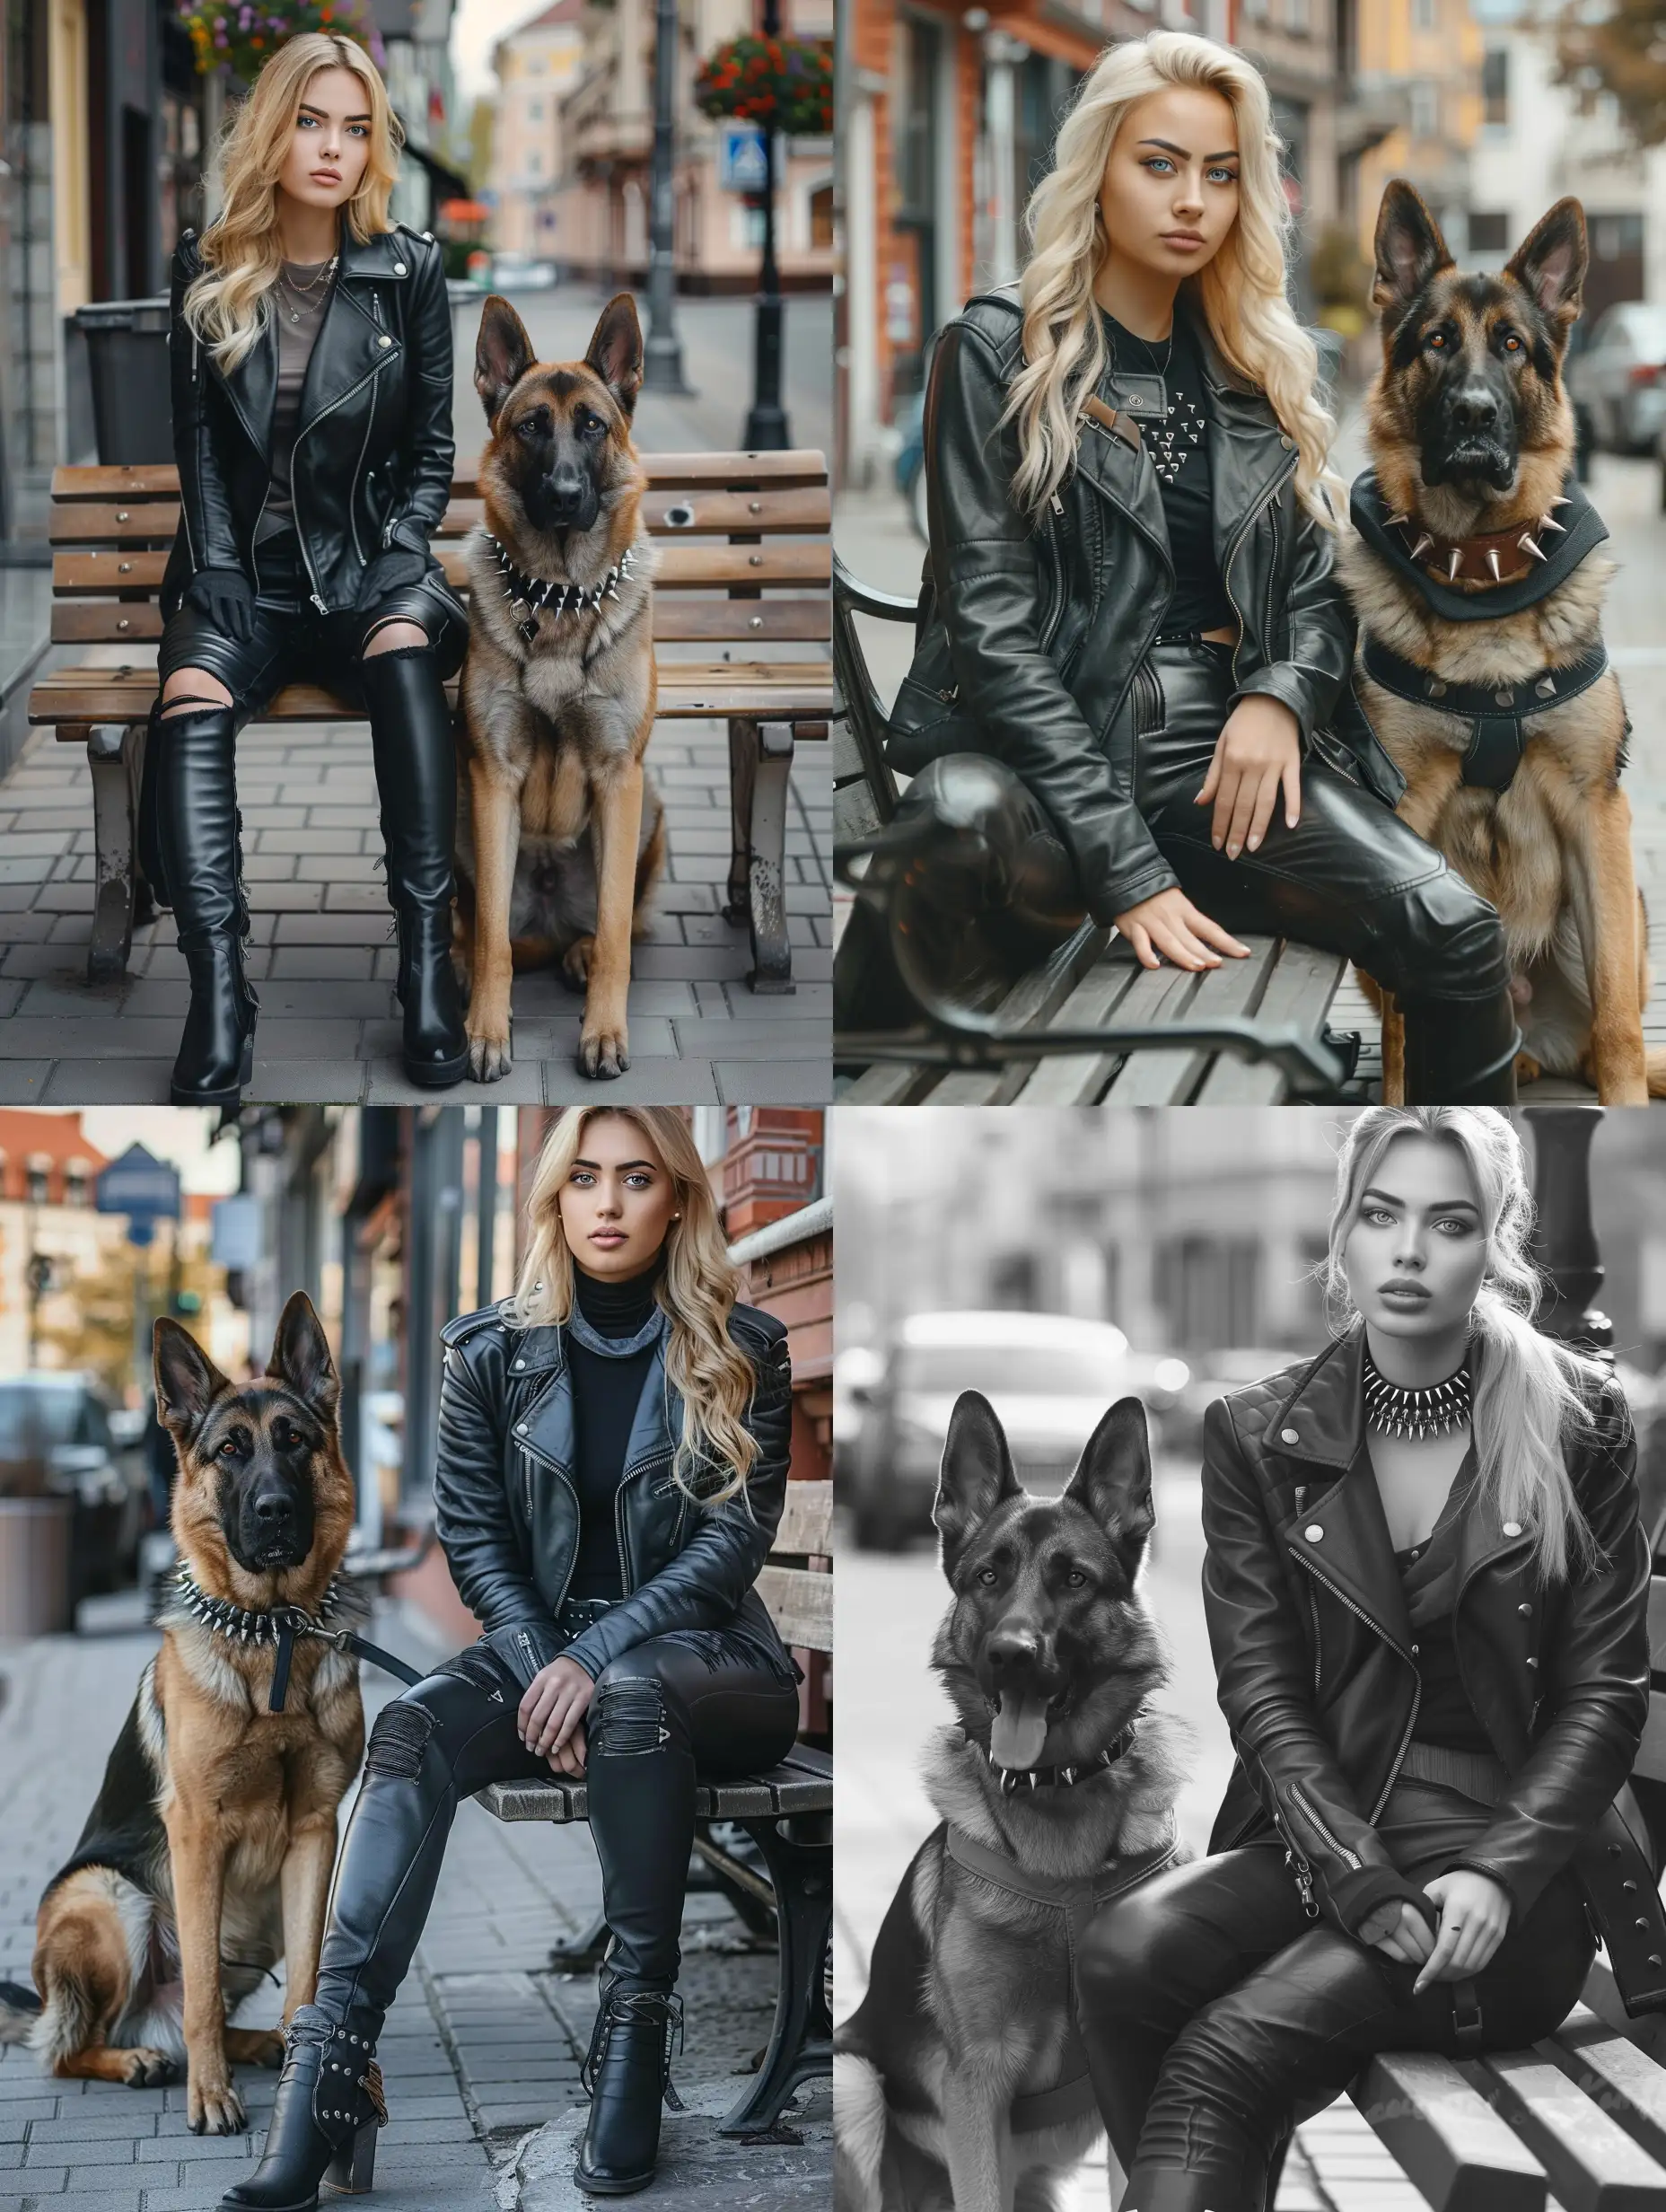 Stylish-Blonde-Girl-and-her-Spiked-Collar-German-Shepherd-Pose-on-Urban-Bench